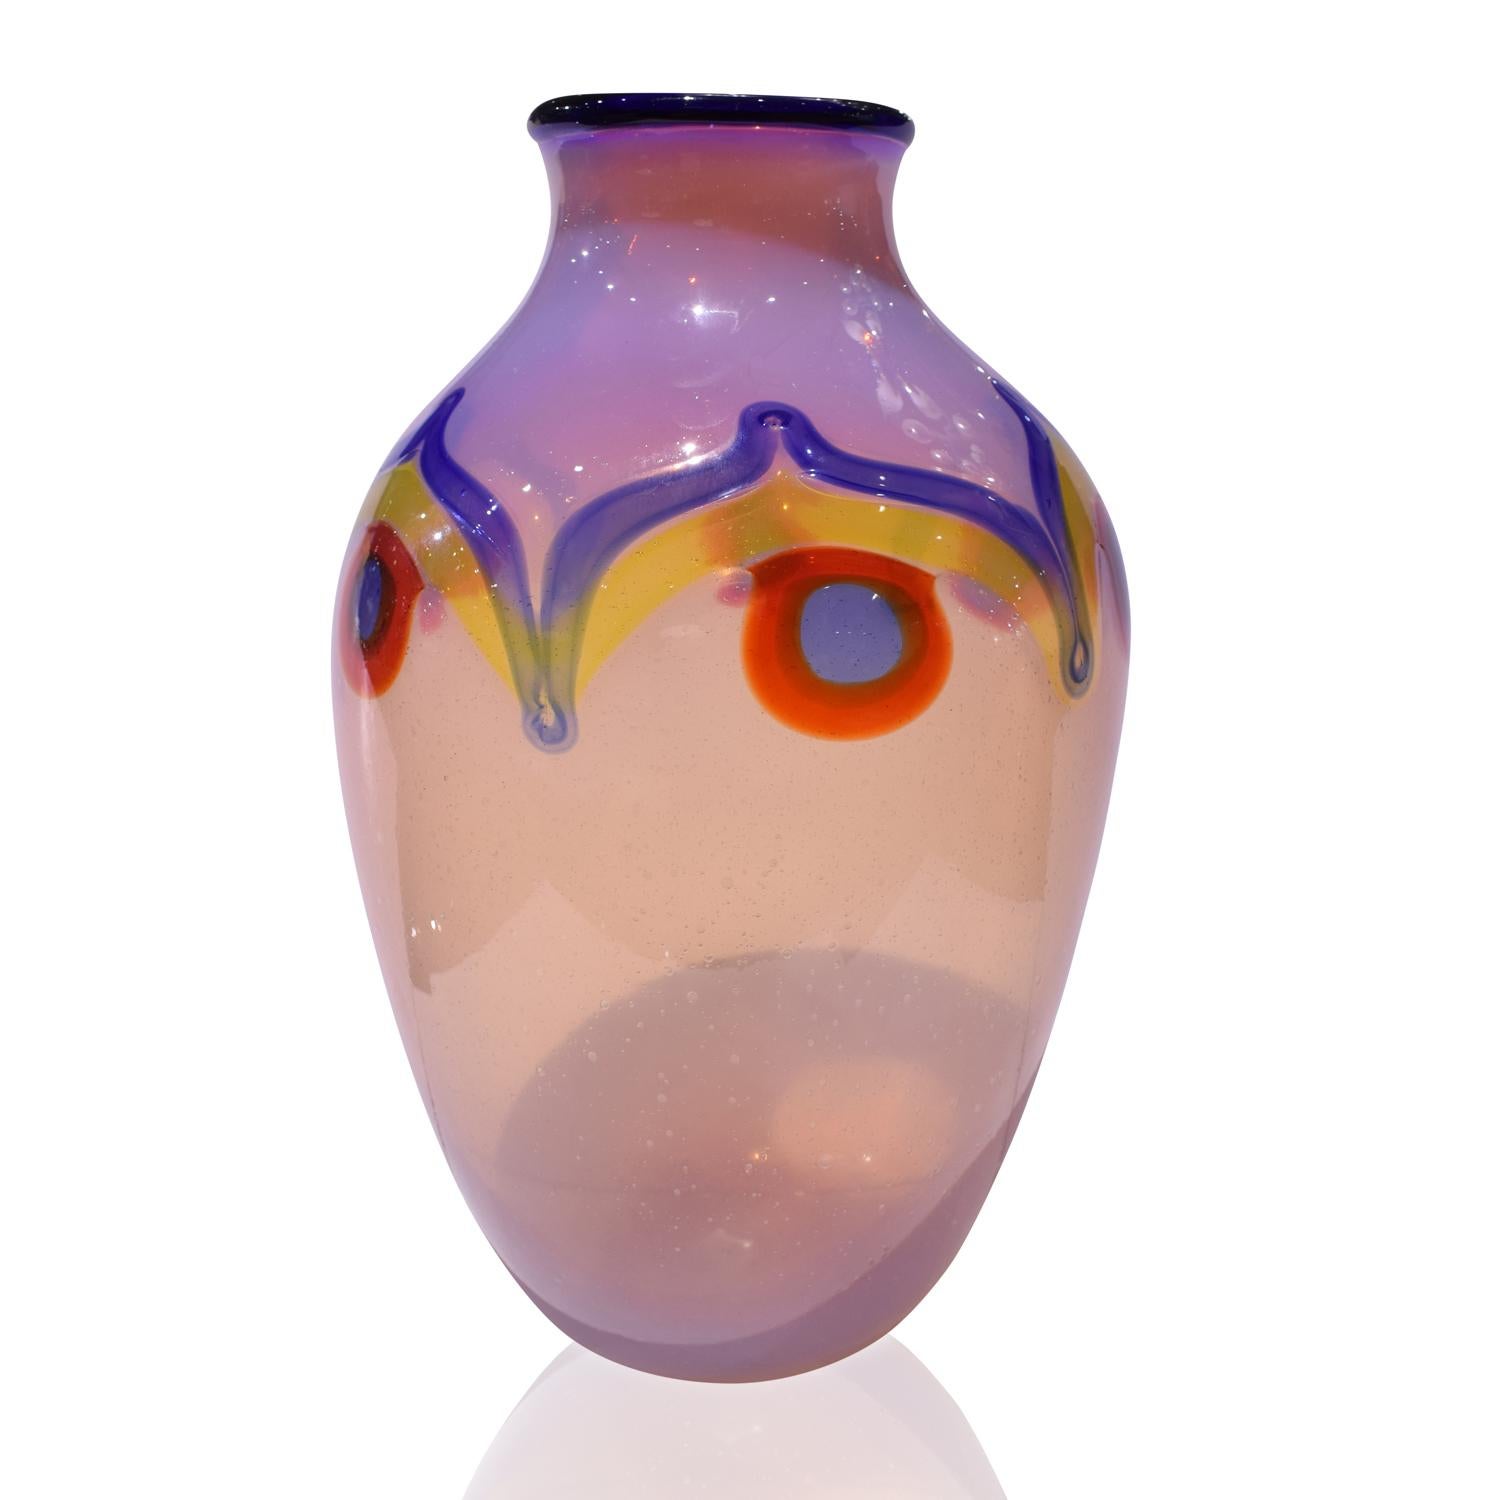 hand blown glass vase from the “Pavone Series”, in pink Pulegoso glass with red and blue murrines, by Anzolo Fuga for Arte Vetraria Muranese (A.V.E.M.) Murano Italy, circa 1958.

Reference:
Rosa Barovier-Mentasti, Anzolo Fuga, Murano Glass